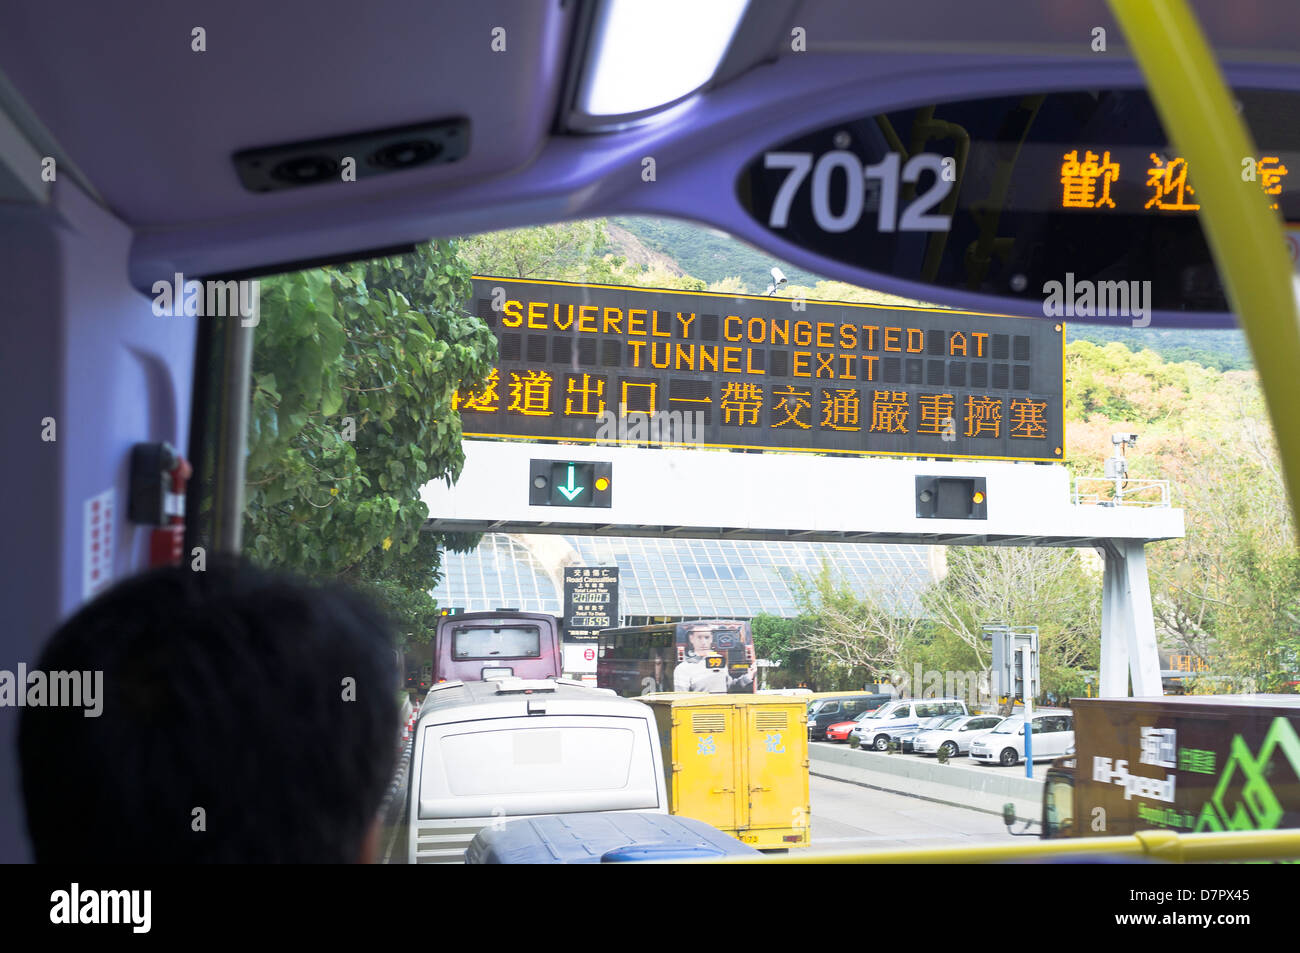 dh Aberdeen Tunnel ABERDEEN HONG KONG Severely congested tunnel sign traffic congestion approaching tunnel china Stock Photo